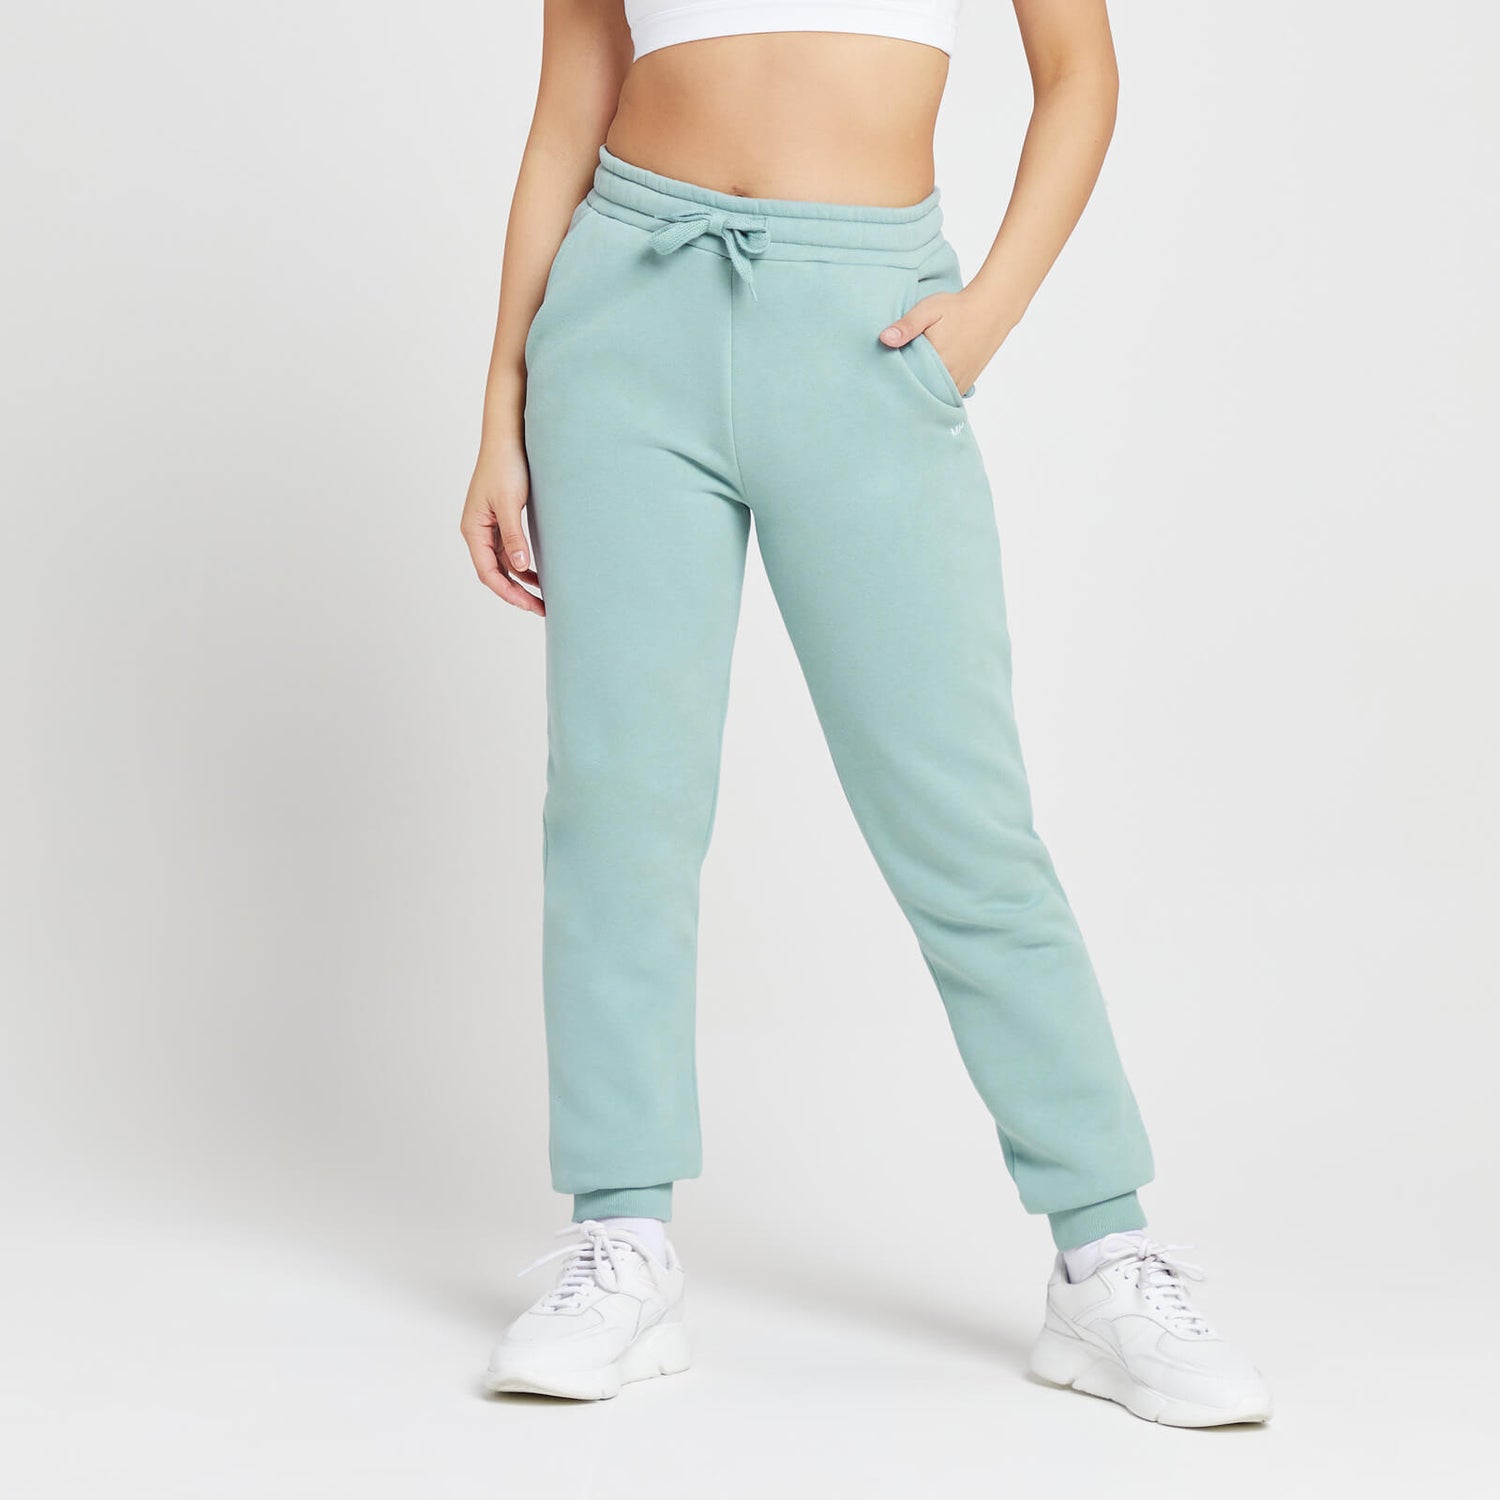 MP Women's Rest Day Joggers - Ice Blue - S